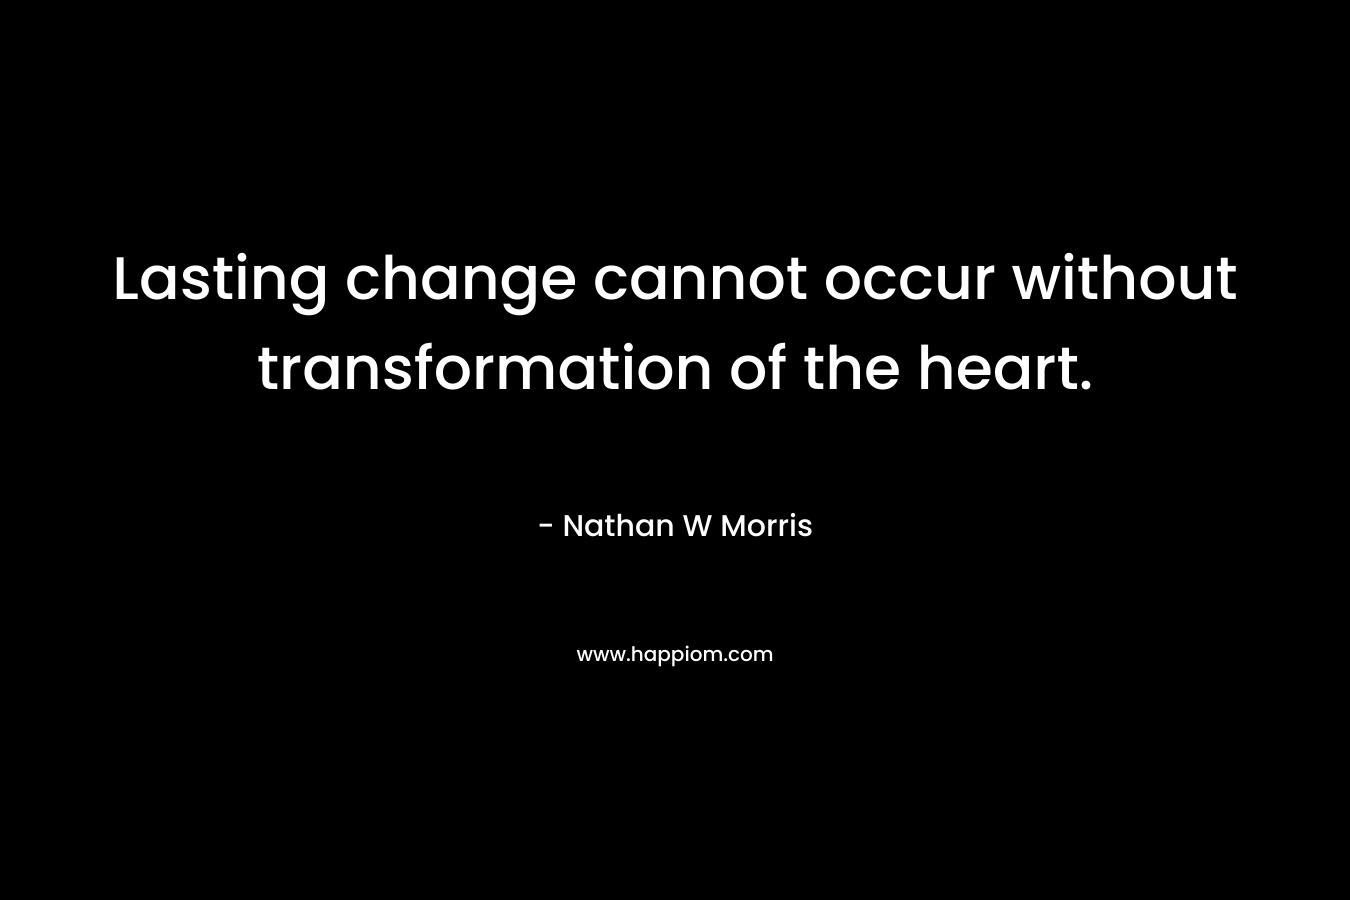 Lasting change cannot occur without transformation of the heart.